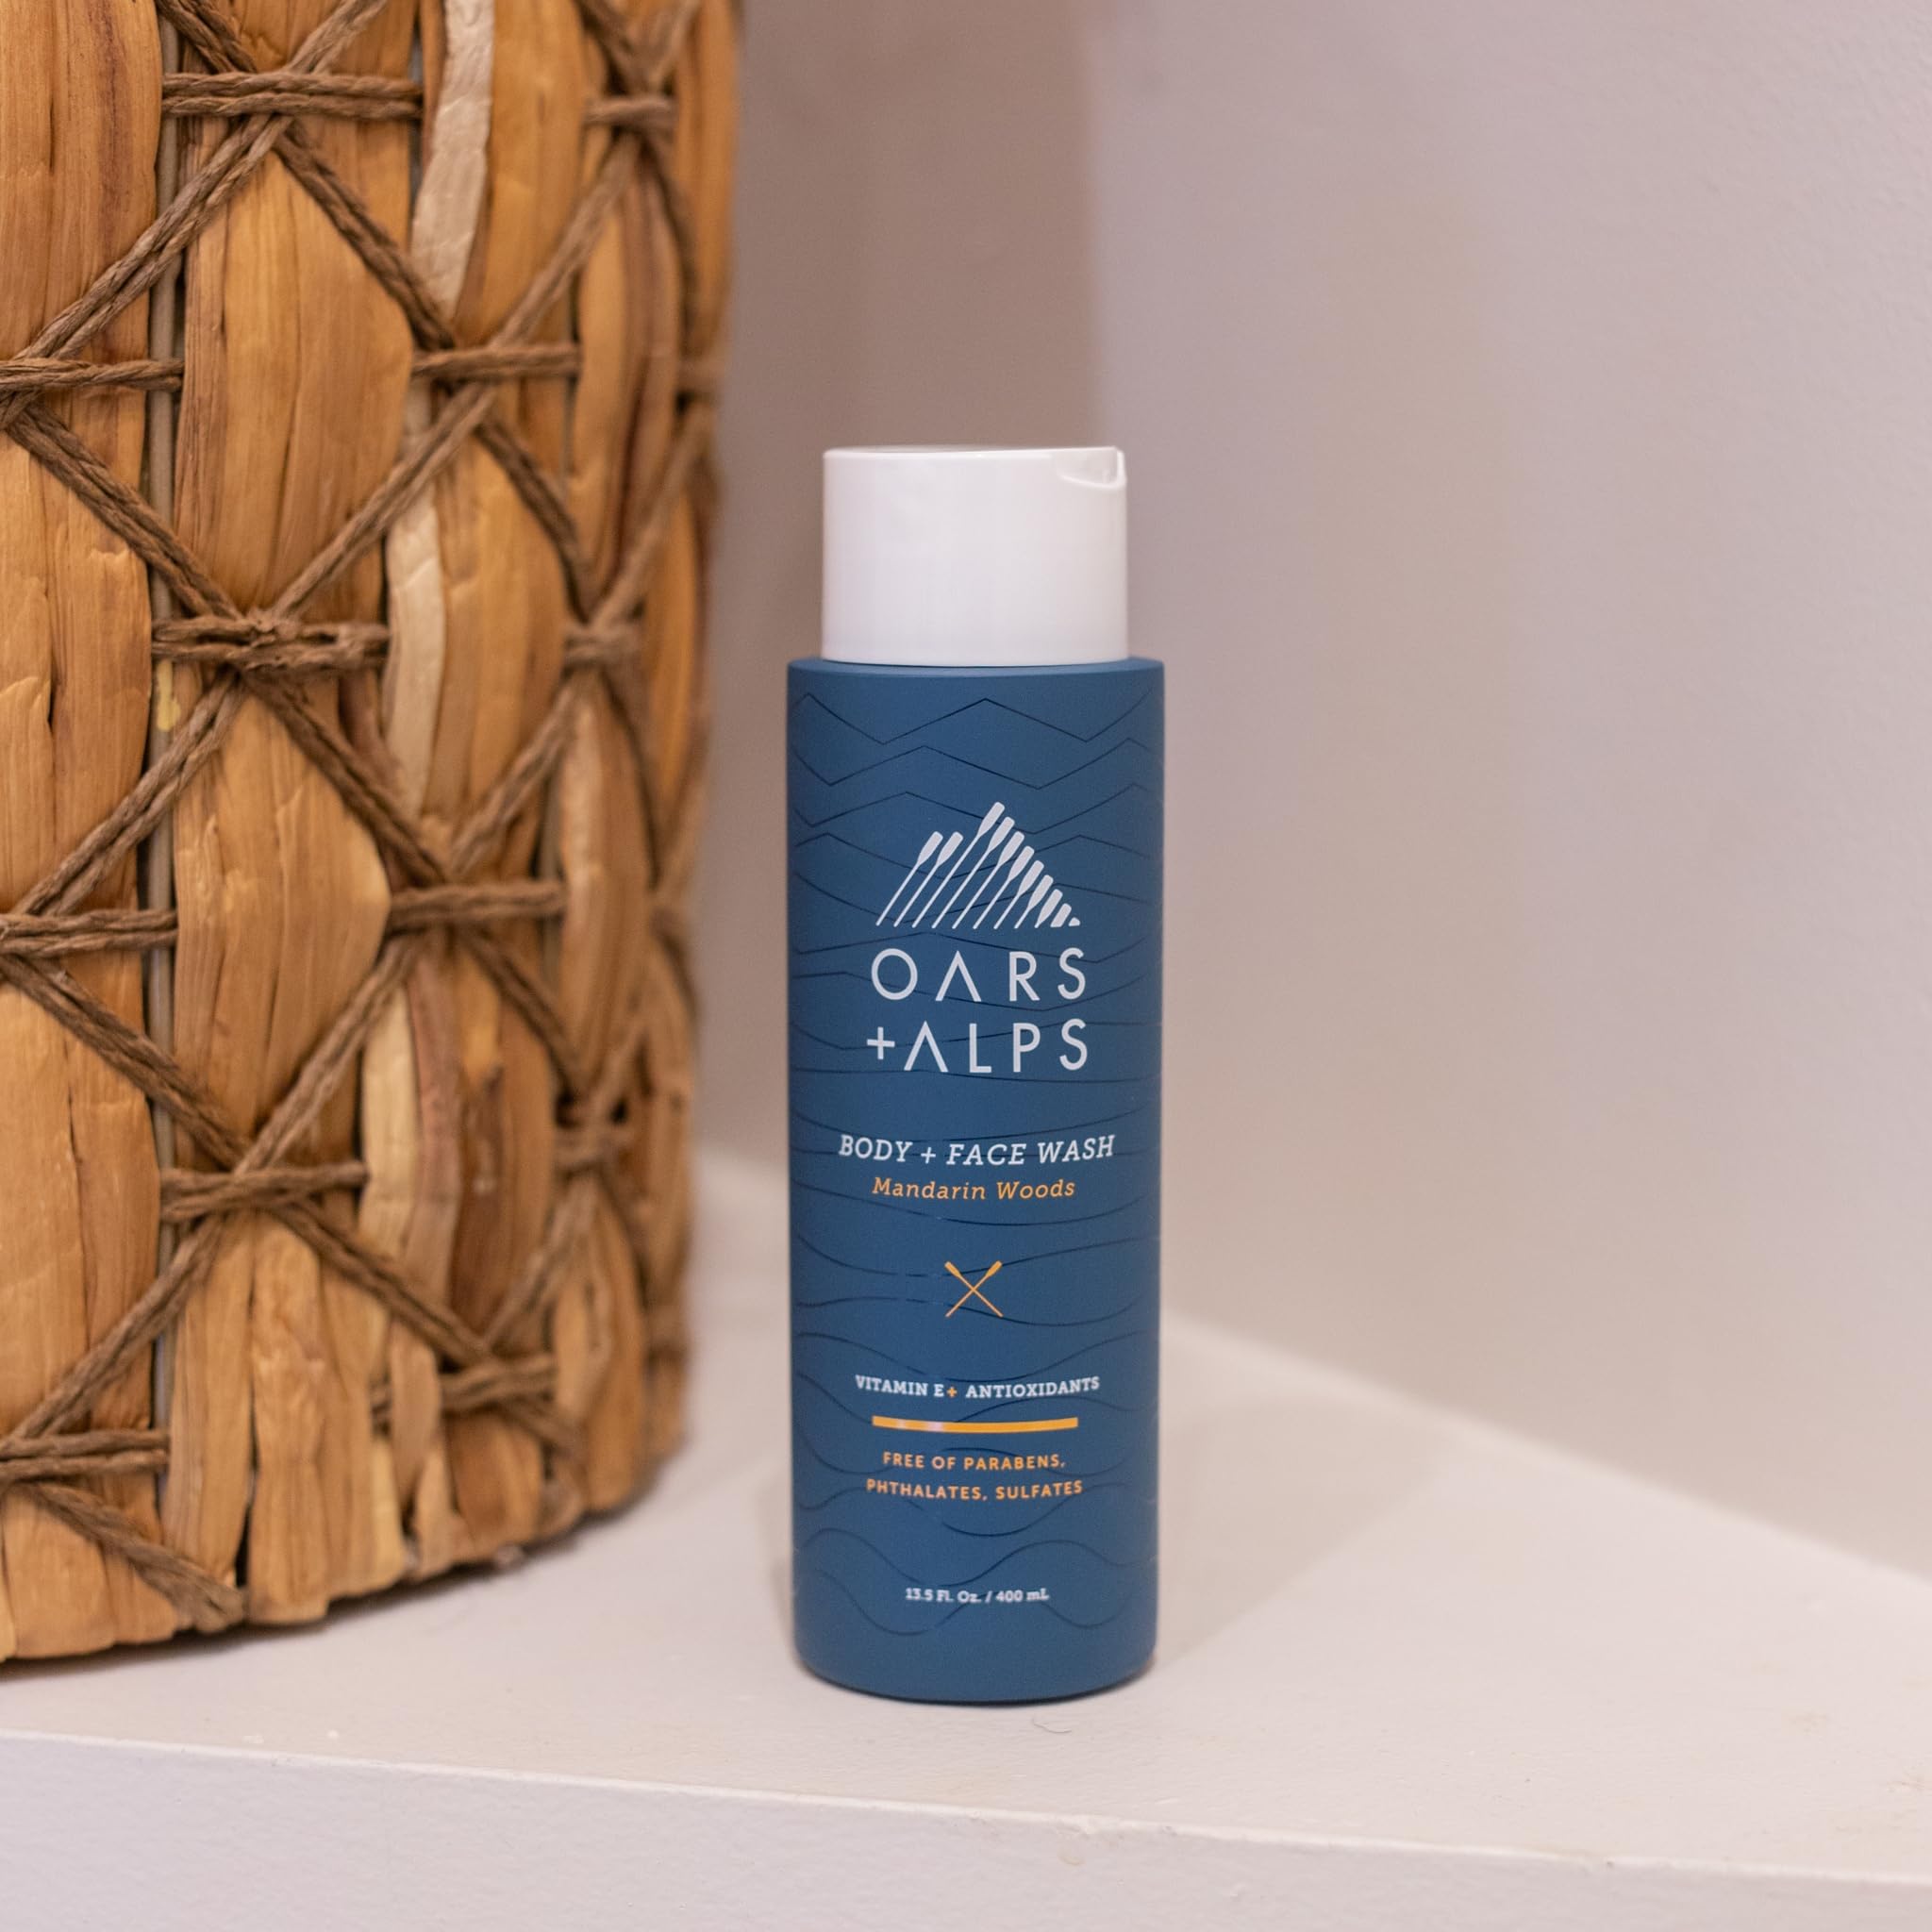 Oars + Alps Mens Moisturizing Body and Face Wash, Skin Care Infused with Vitamin E and Antioxidants, Sulfate Free, Mandarin Woods, 1 Pack